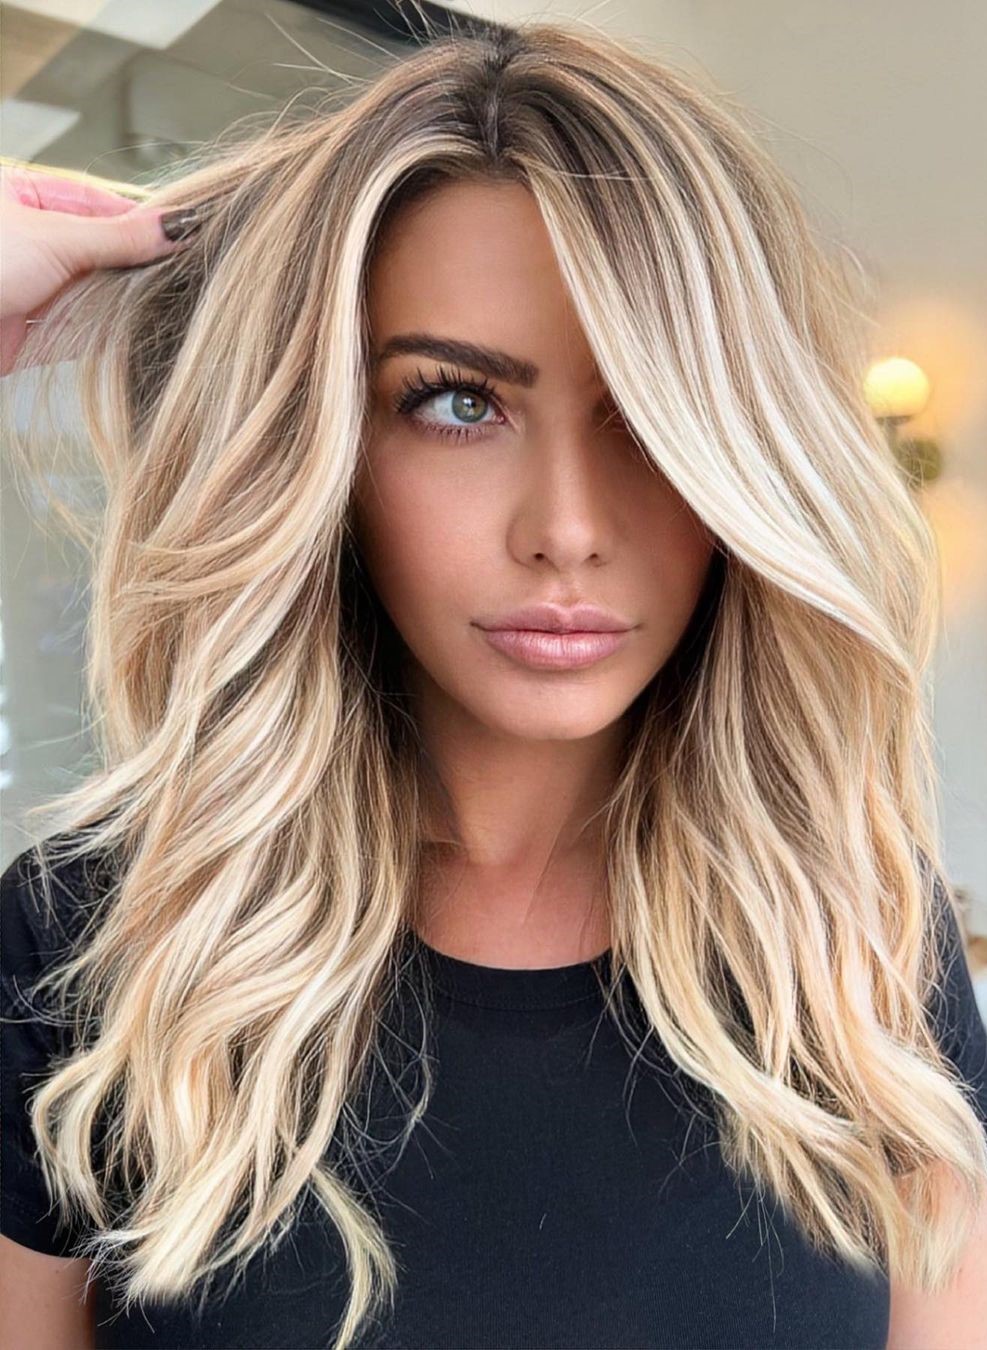 44 Hair Color Ideas for Short Hair That Are Trending Now